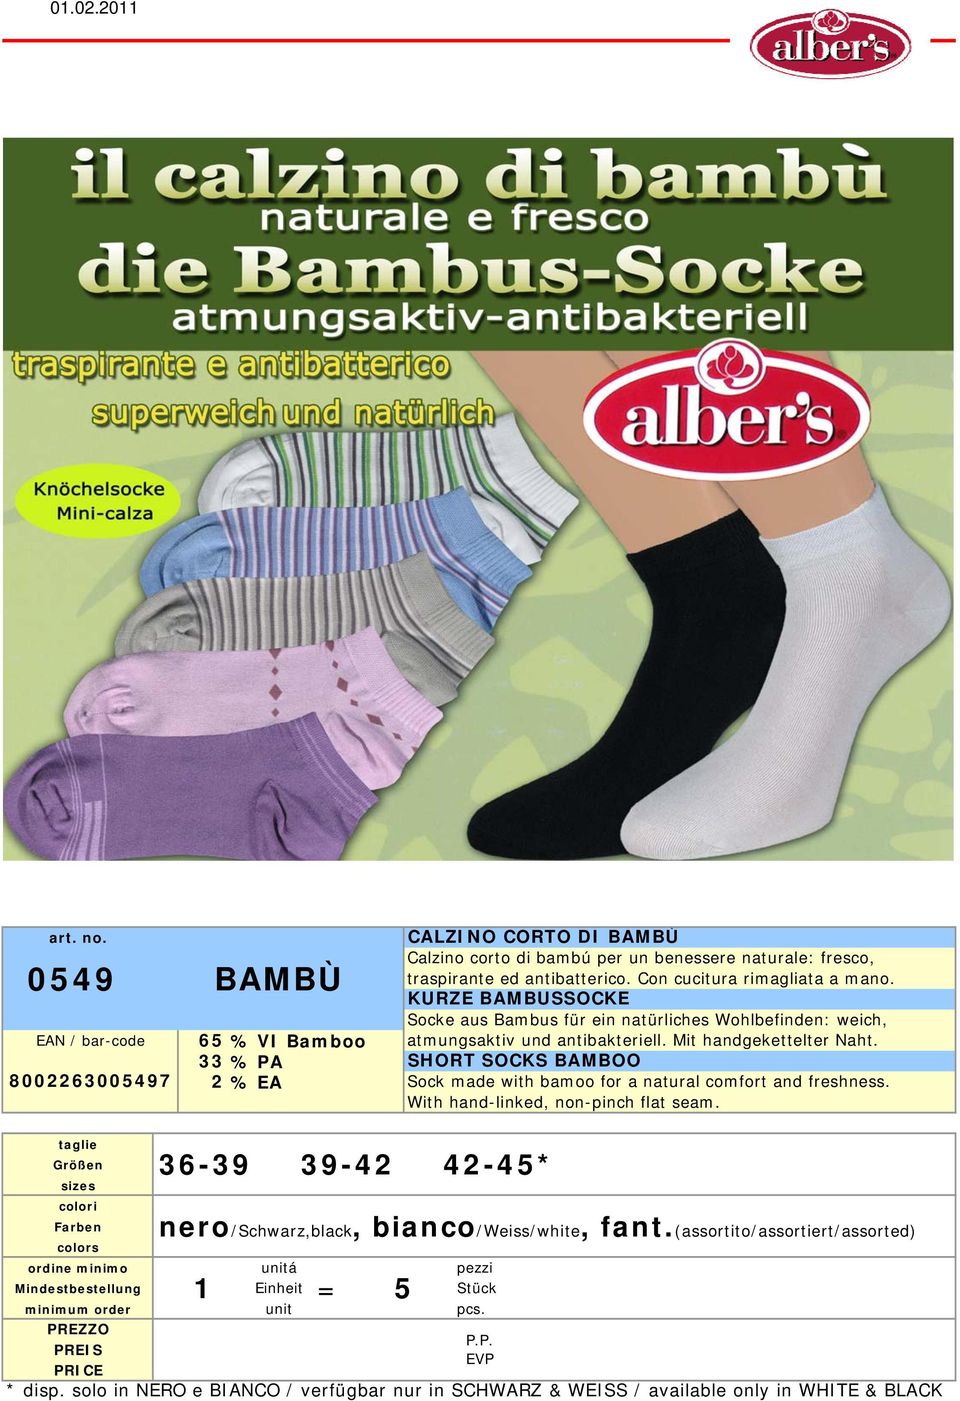 BAMBÙ 65 33 %PA 2 %EA SHORT SOCKS BAMBOO Sock made with bamoo for a natural comfort and freshness. With hand-linked, non-pinch flat seam.